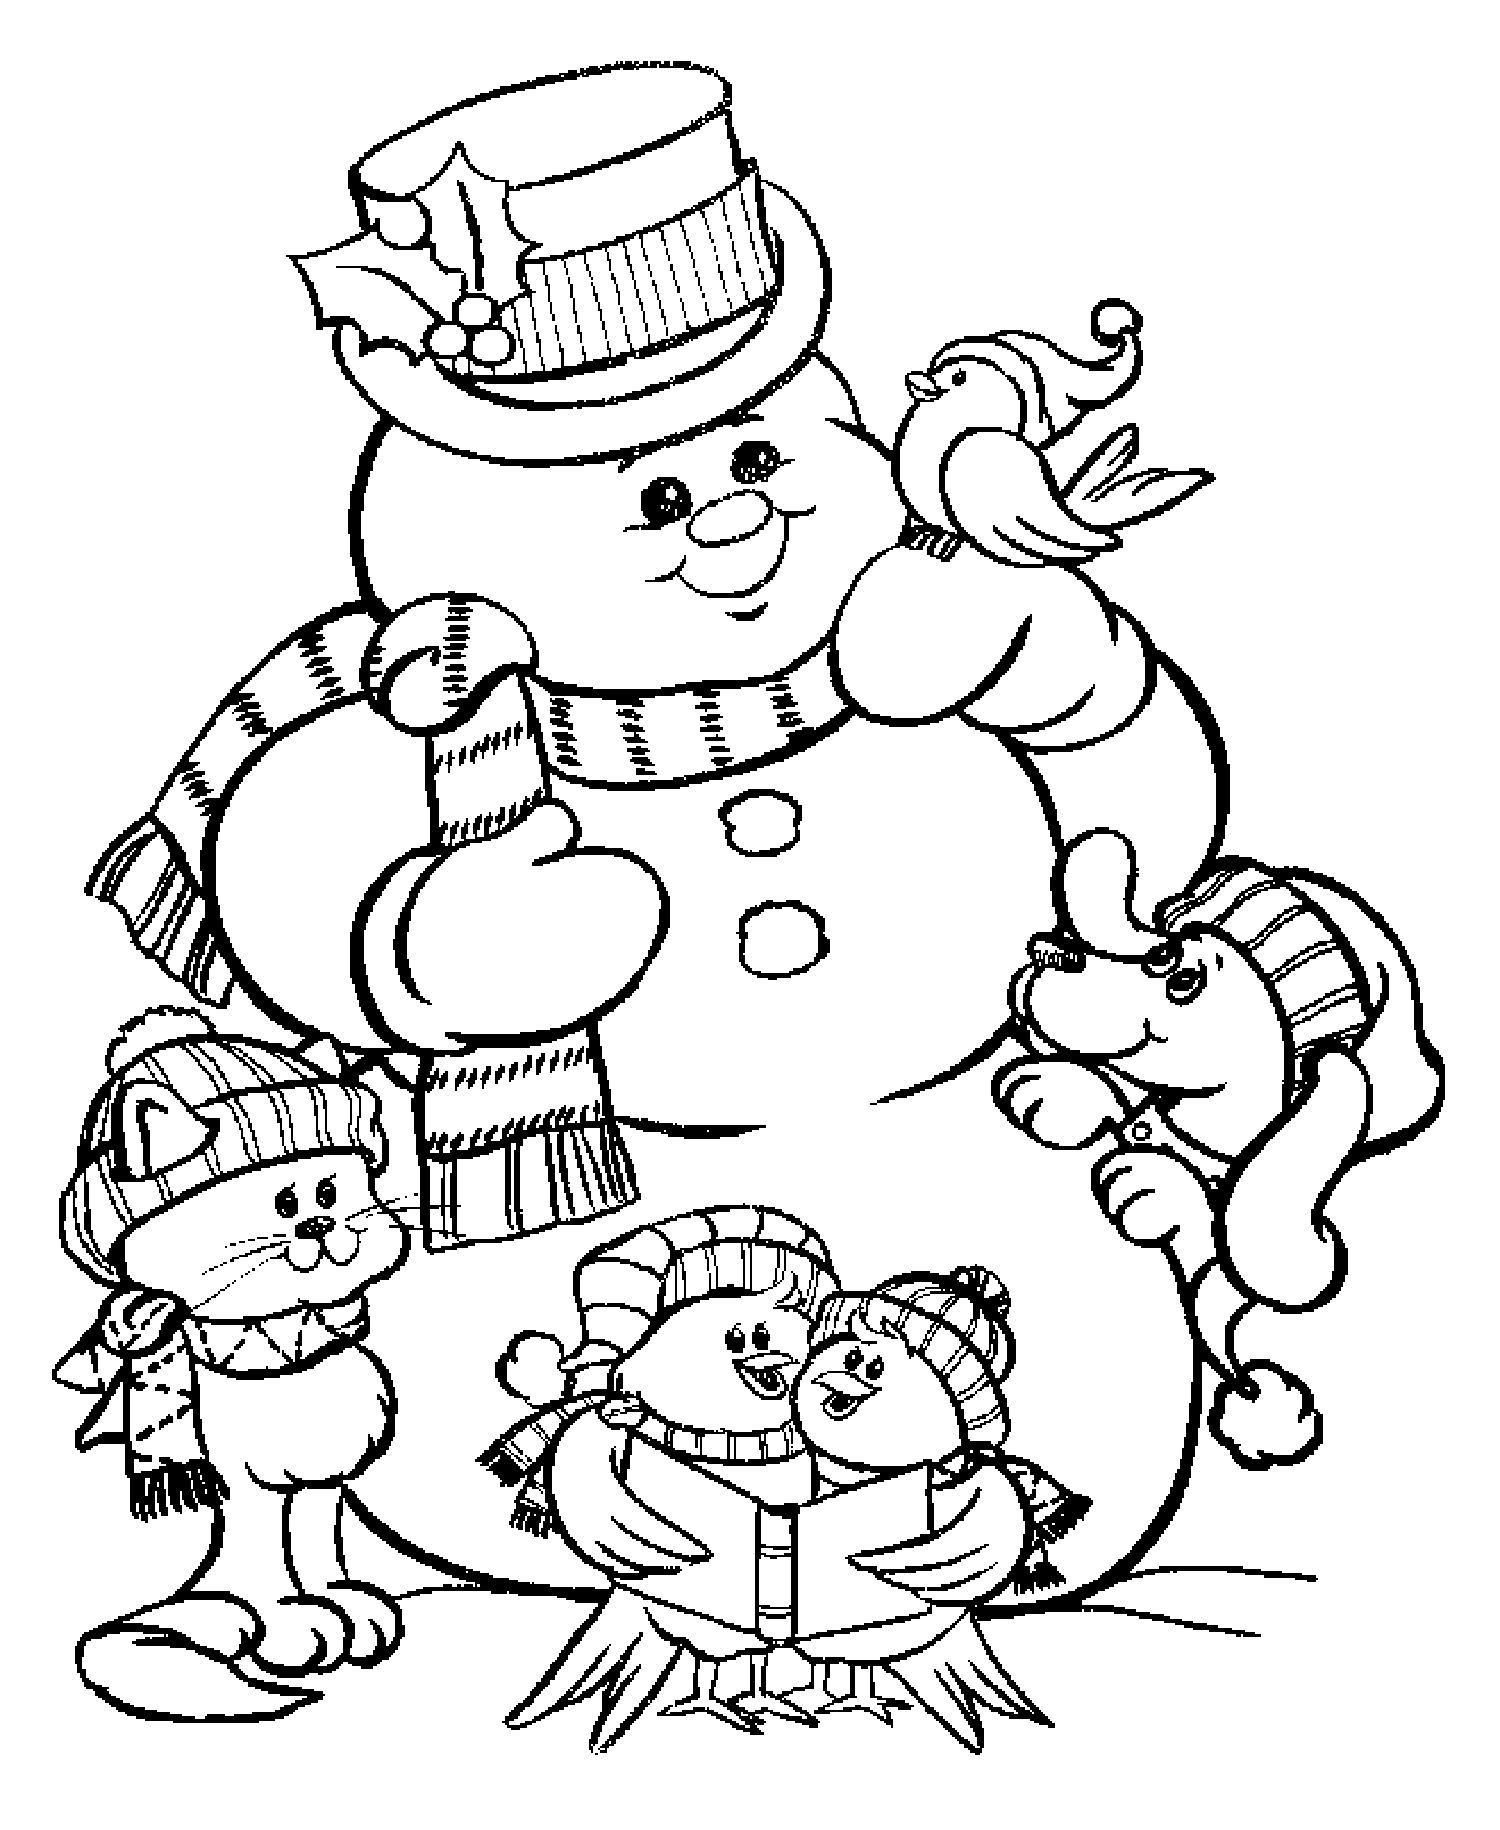 Download Snowman - Christmas Coloring pages for kids to print & color